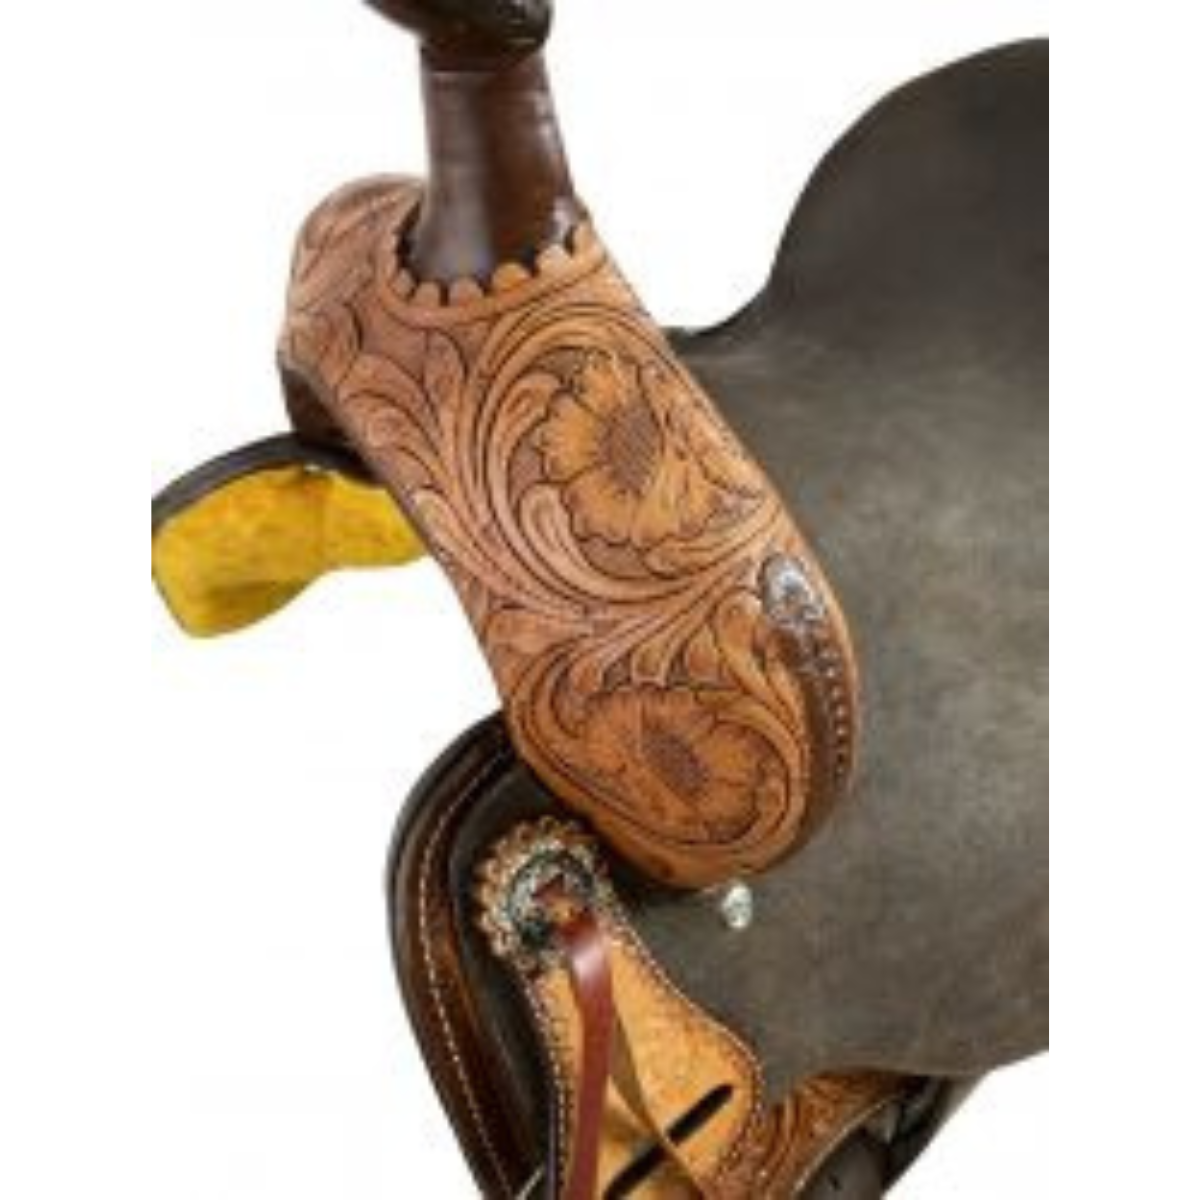 14", 15", 16" Double T Roughout Barrel Saddle With Floral Tooling and White Buckstitching. - Double T Saddles